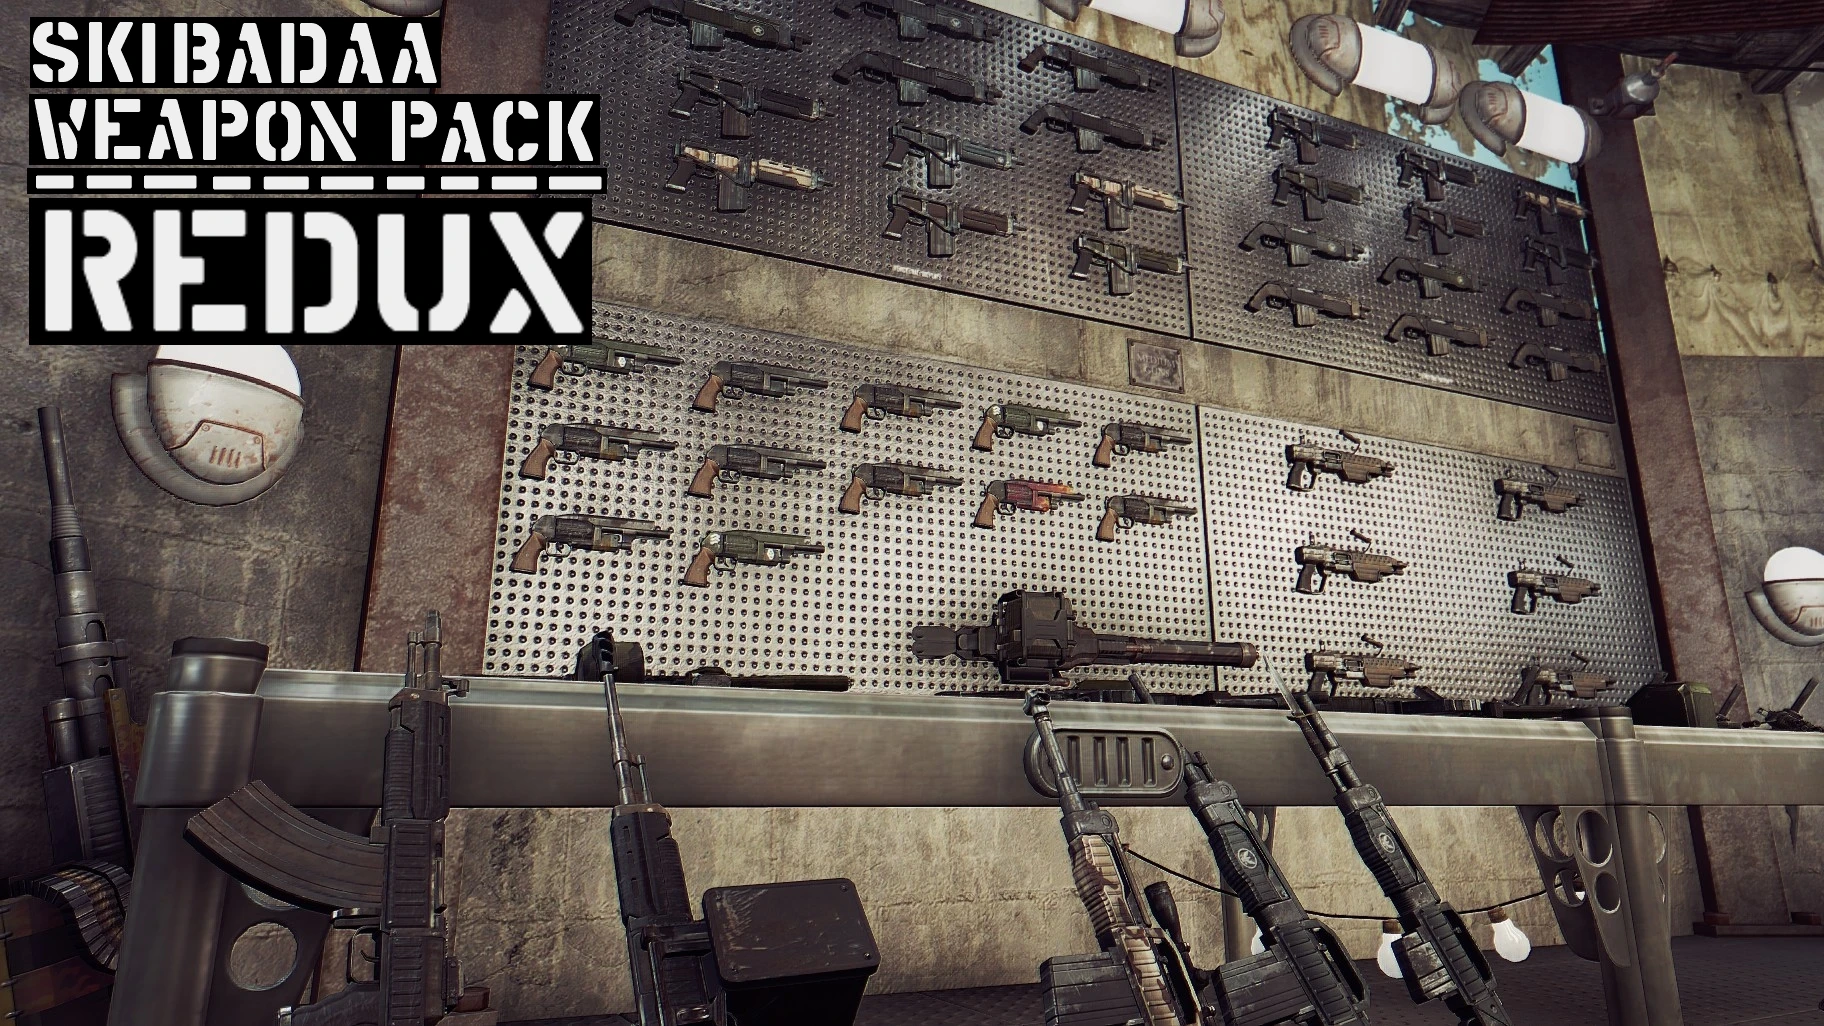 Skibadaa weapon pack fallout 4 (120) фото